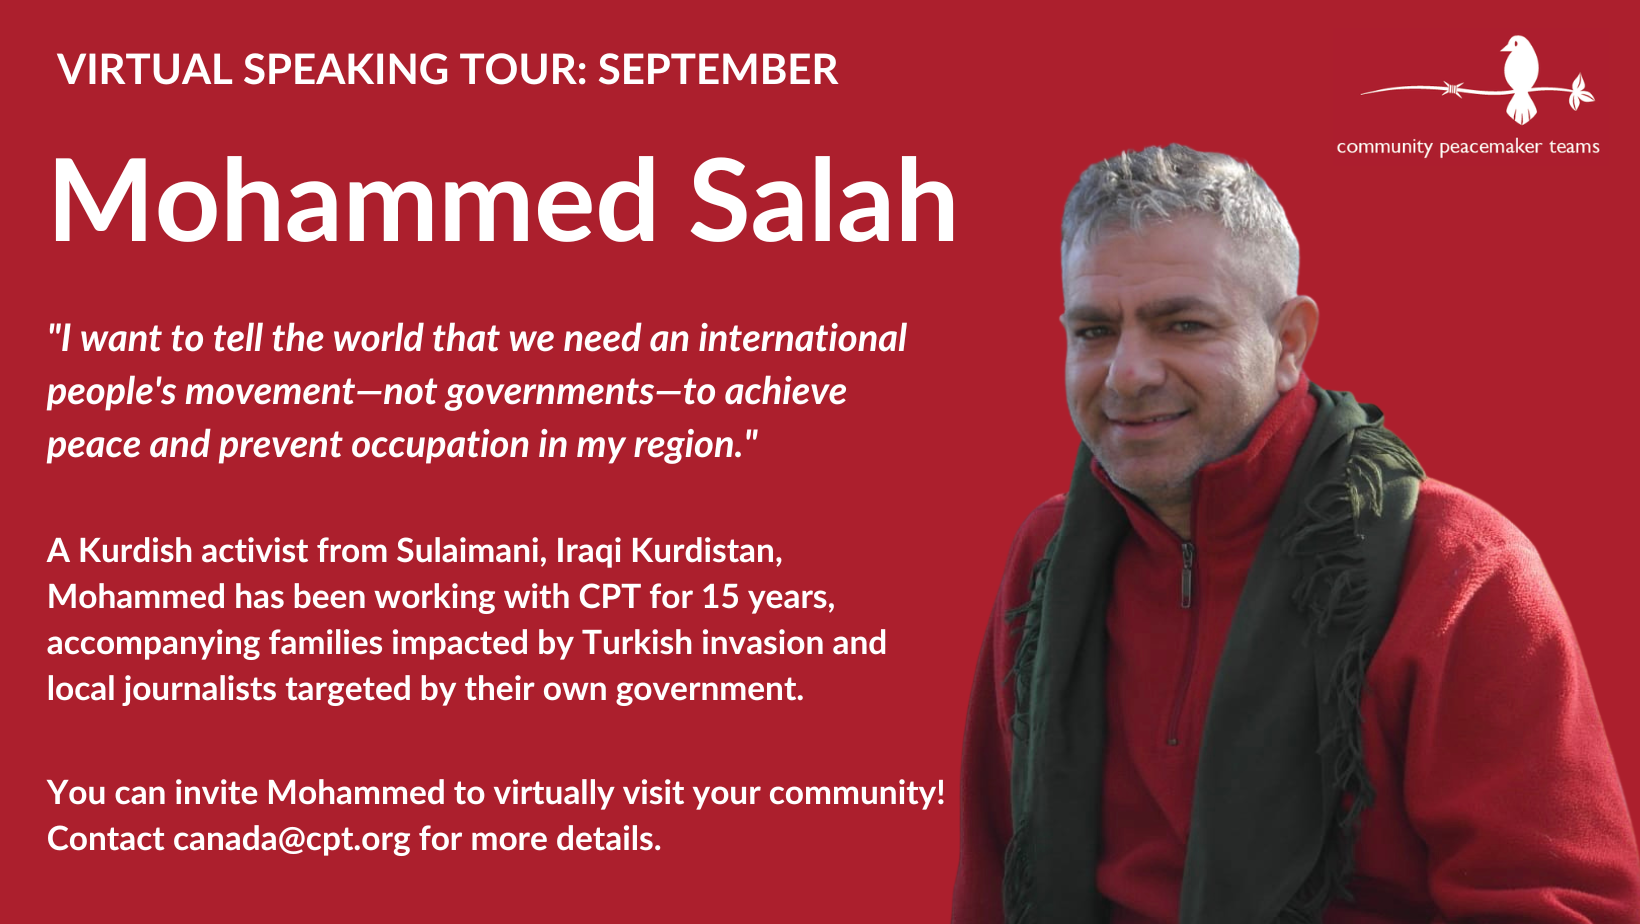 An ad with a photo of a man wearing a red fleece and a green scarf smiling at the camera. To the left is text that reads ''Virtual speaking tour: September. Mohammed Saleh.'' In the top right corner is the CPT logo